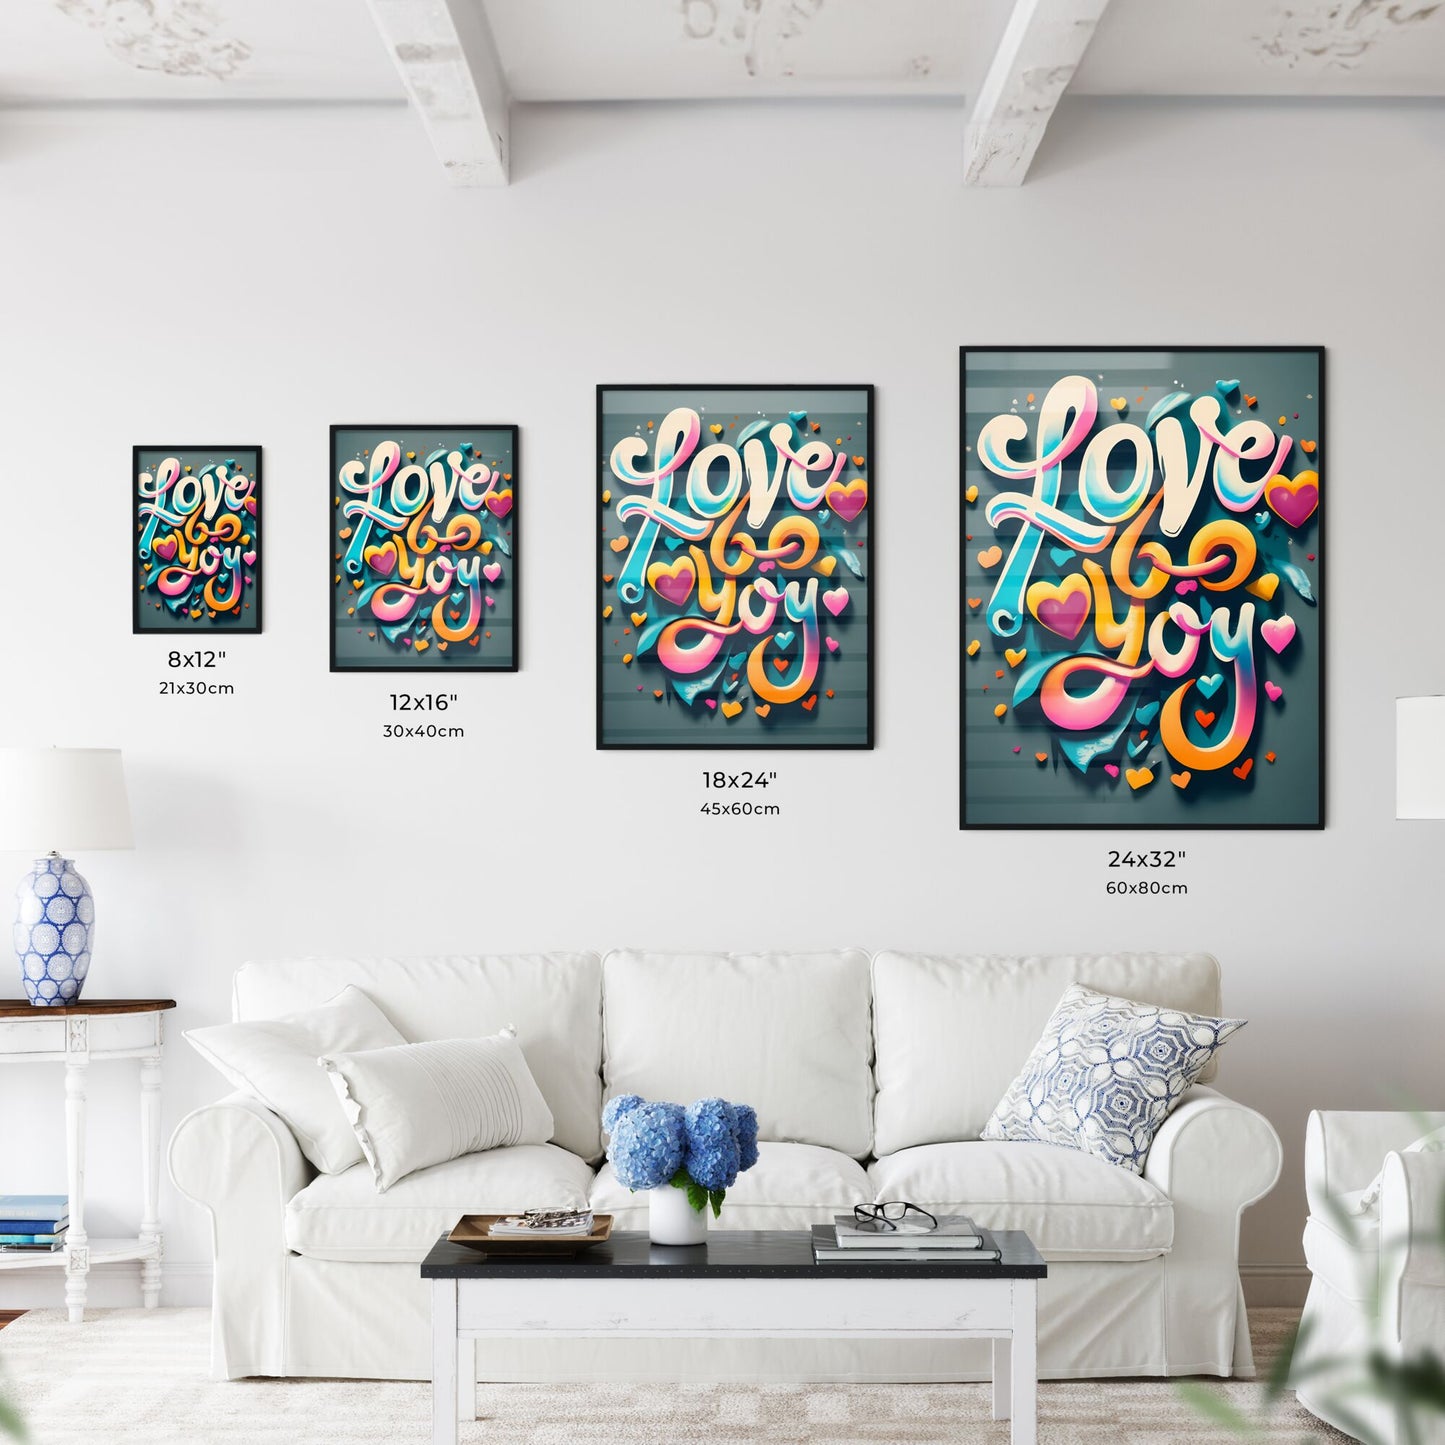 Love You - A Colorful Text With Hearts Art Print Default Title